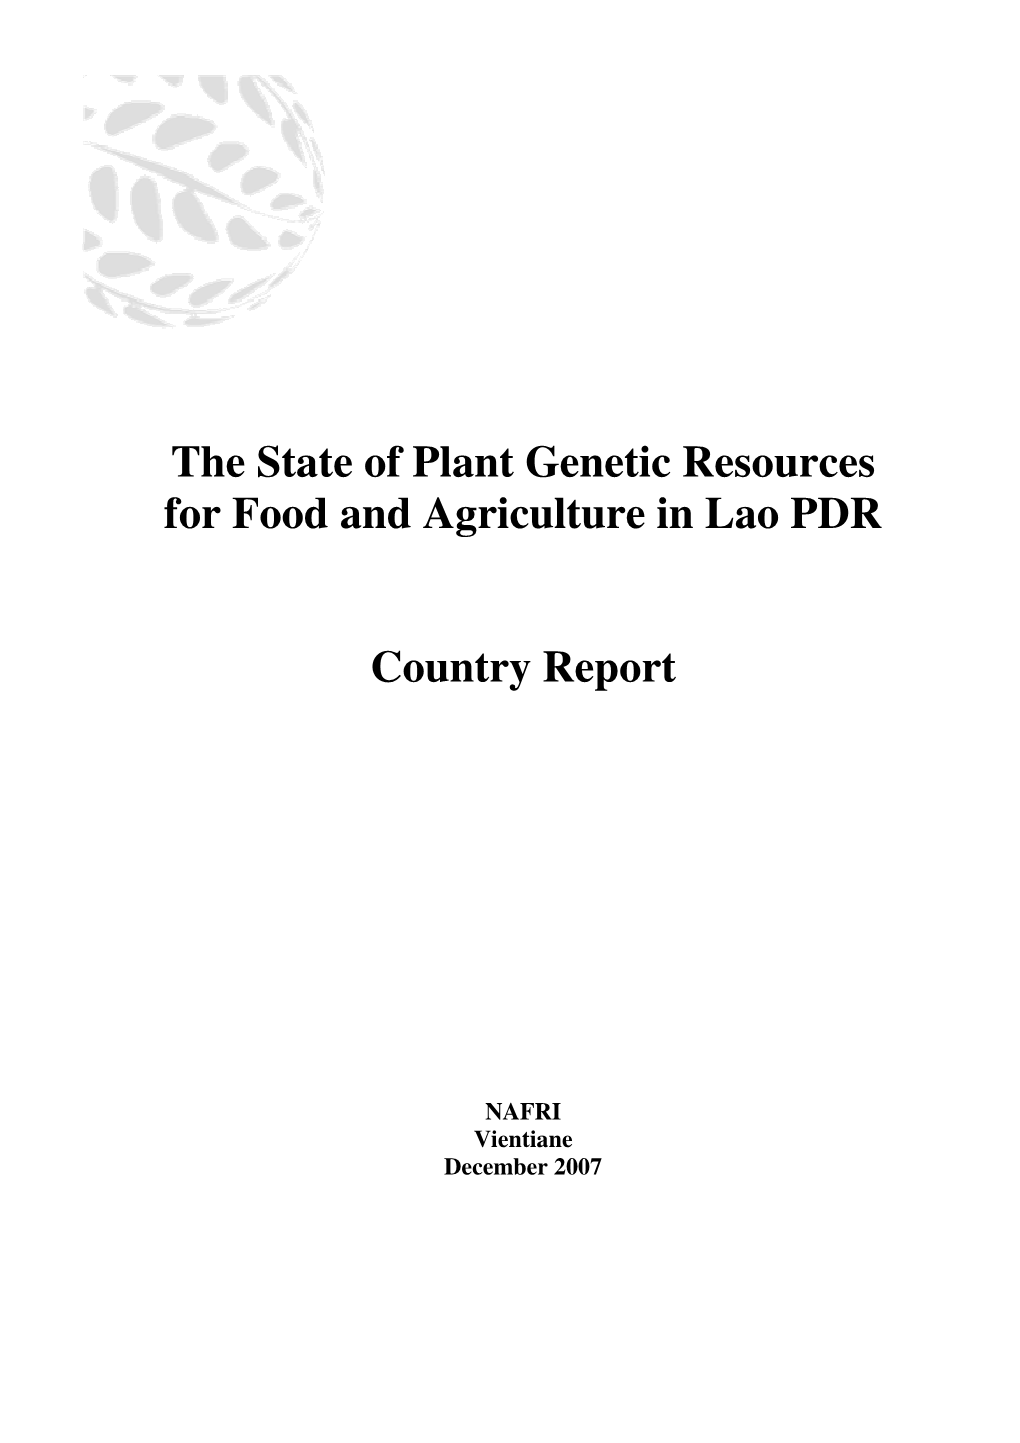 Country Report on the State of PGRFA. NAFRI, December 2007